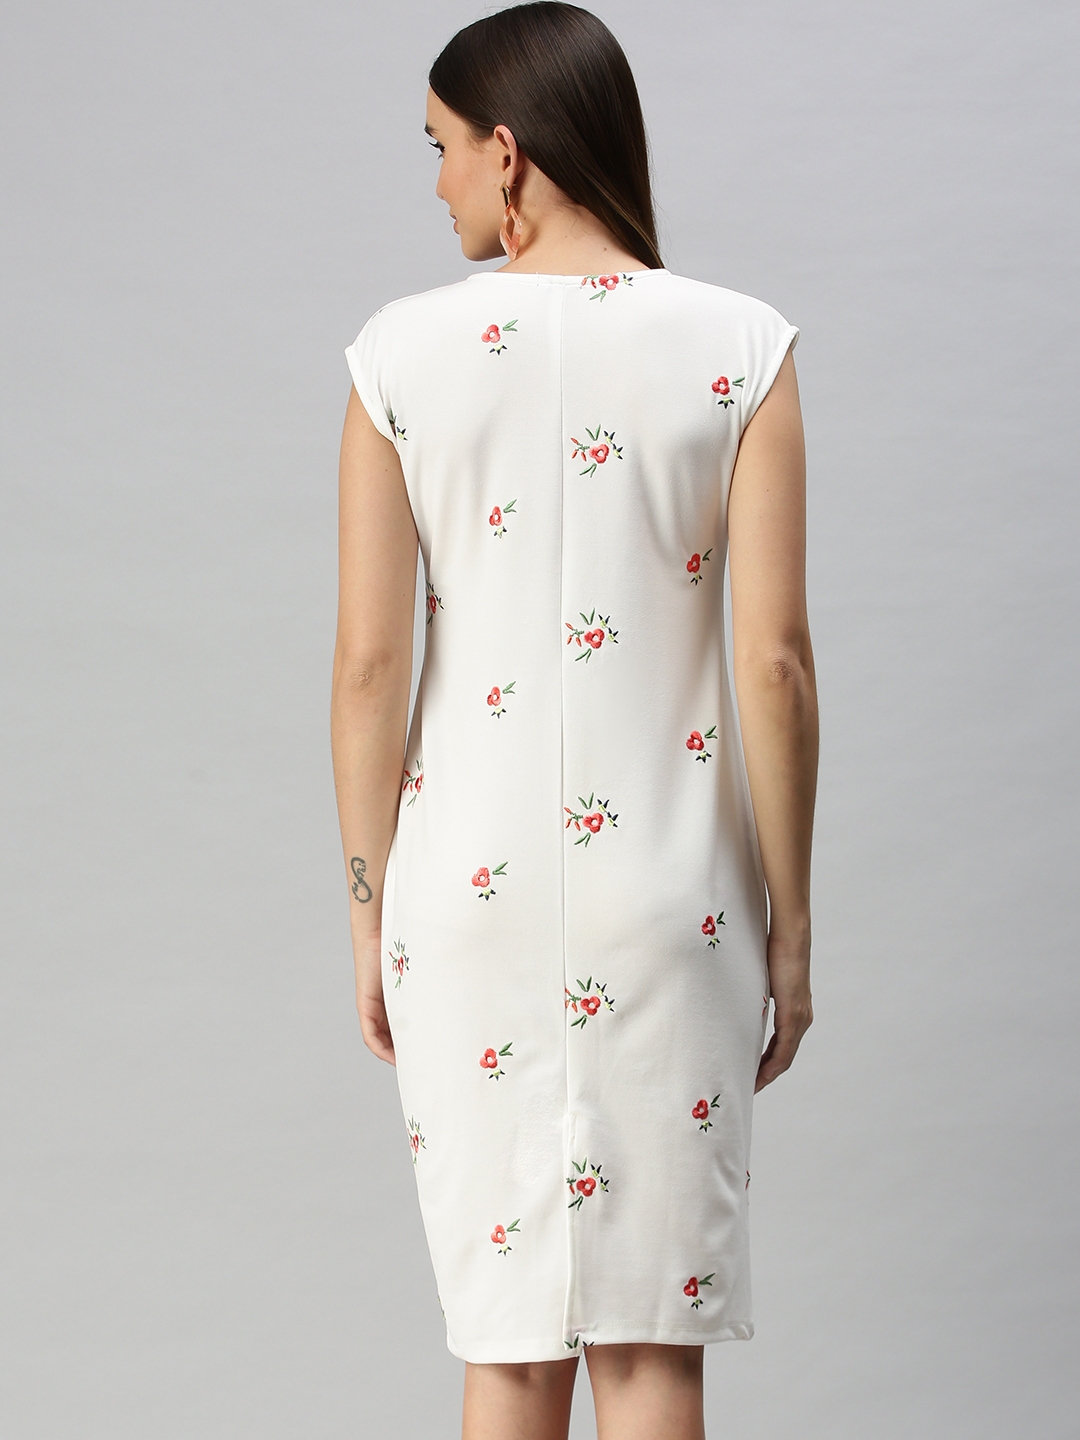 Women's White Polyester Embroidered Dresses